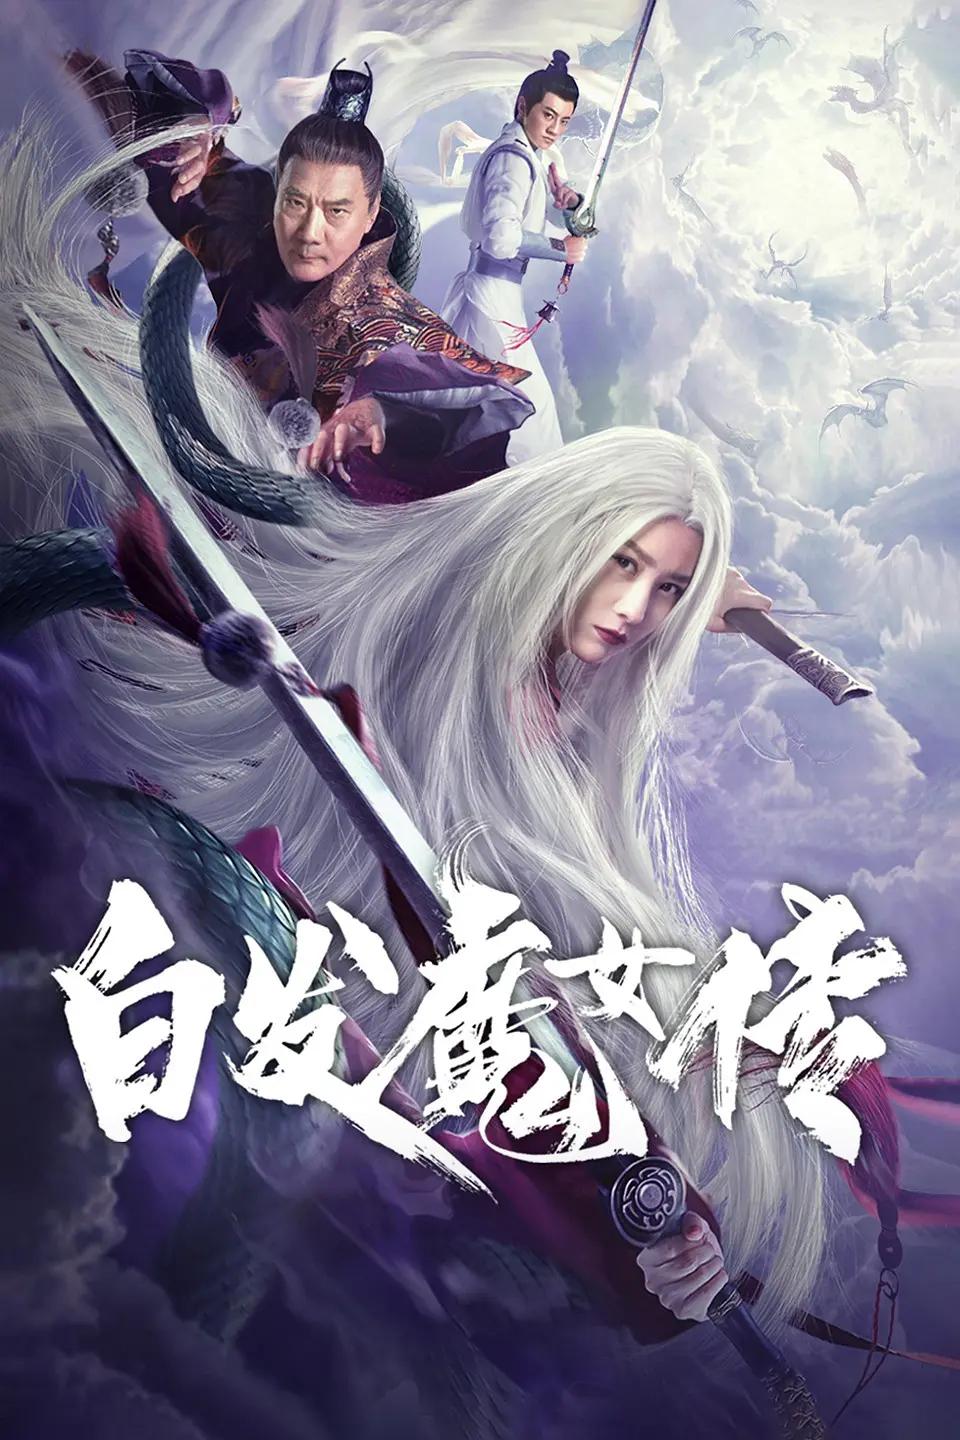 White Haired Devil Lady 2020 Dual Audio Hindi ORG 720p HDRip 950MB Free Download